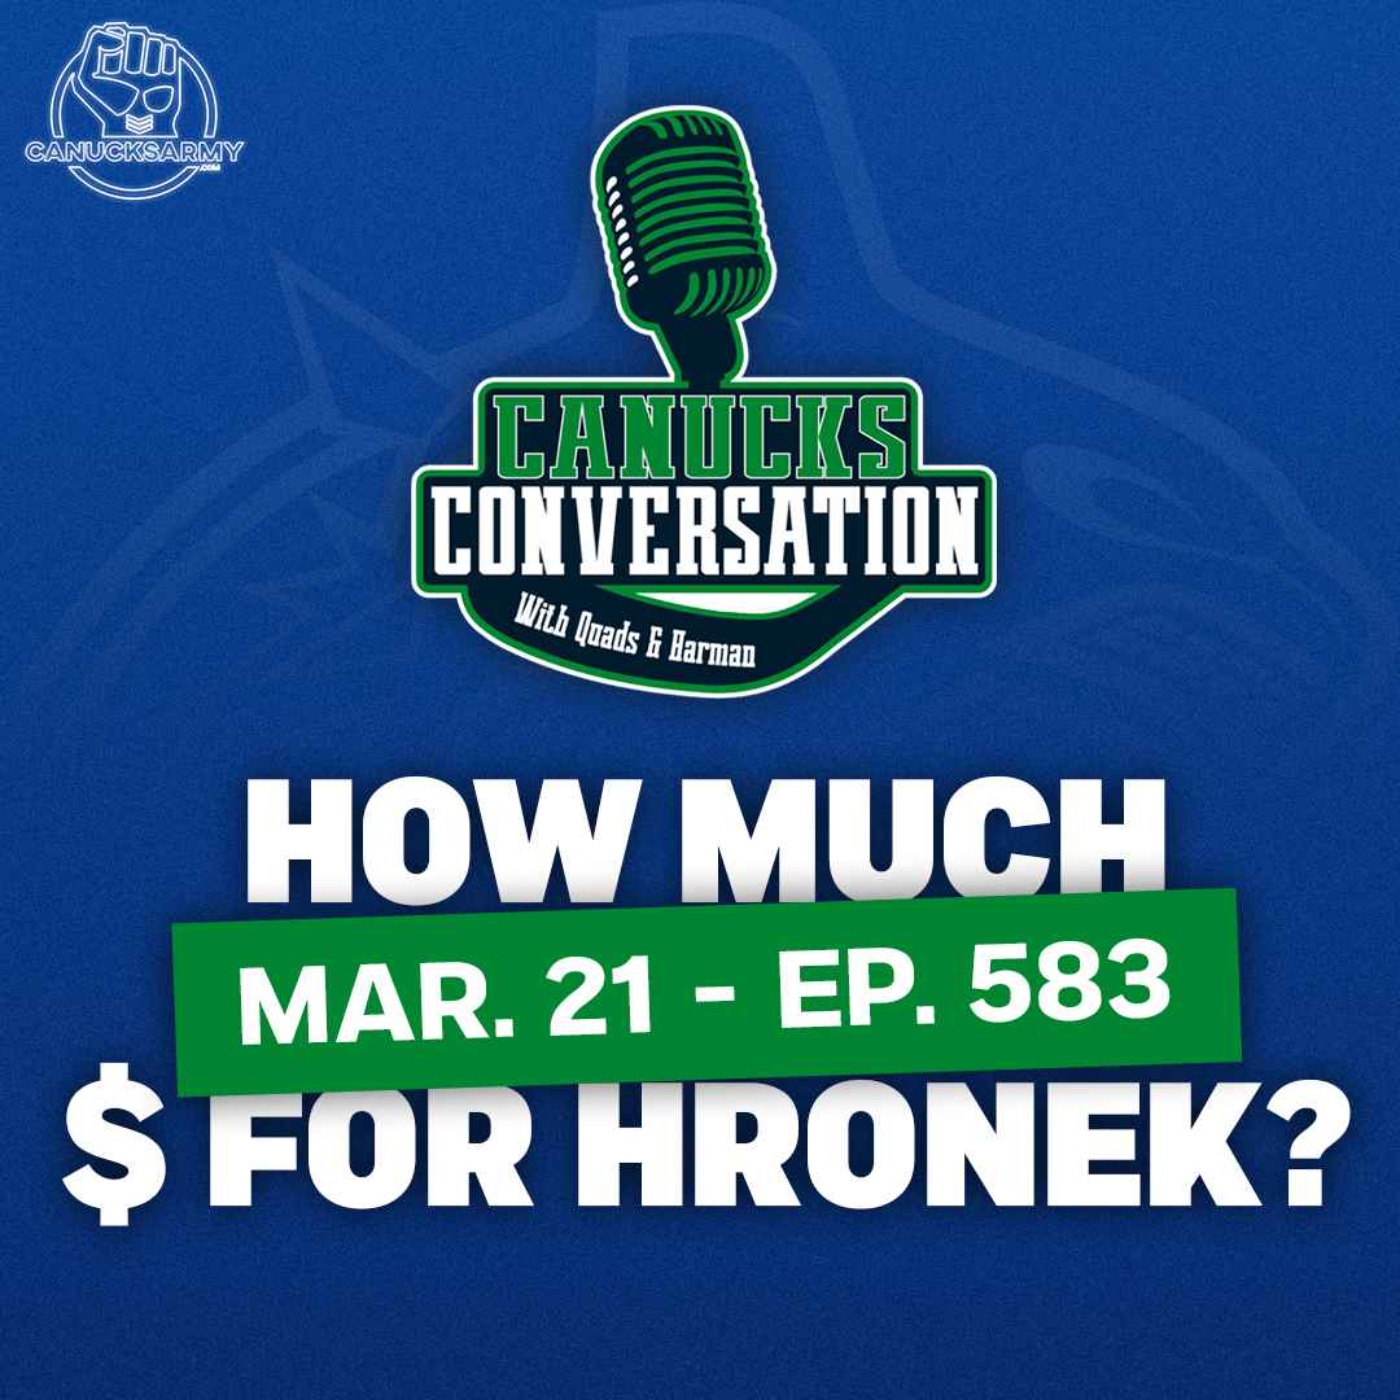 Mar. 21: But seriously, what will Hronek cost? ft. Frank Seravalli (Ep. 583)